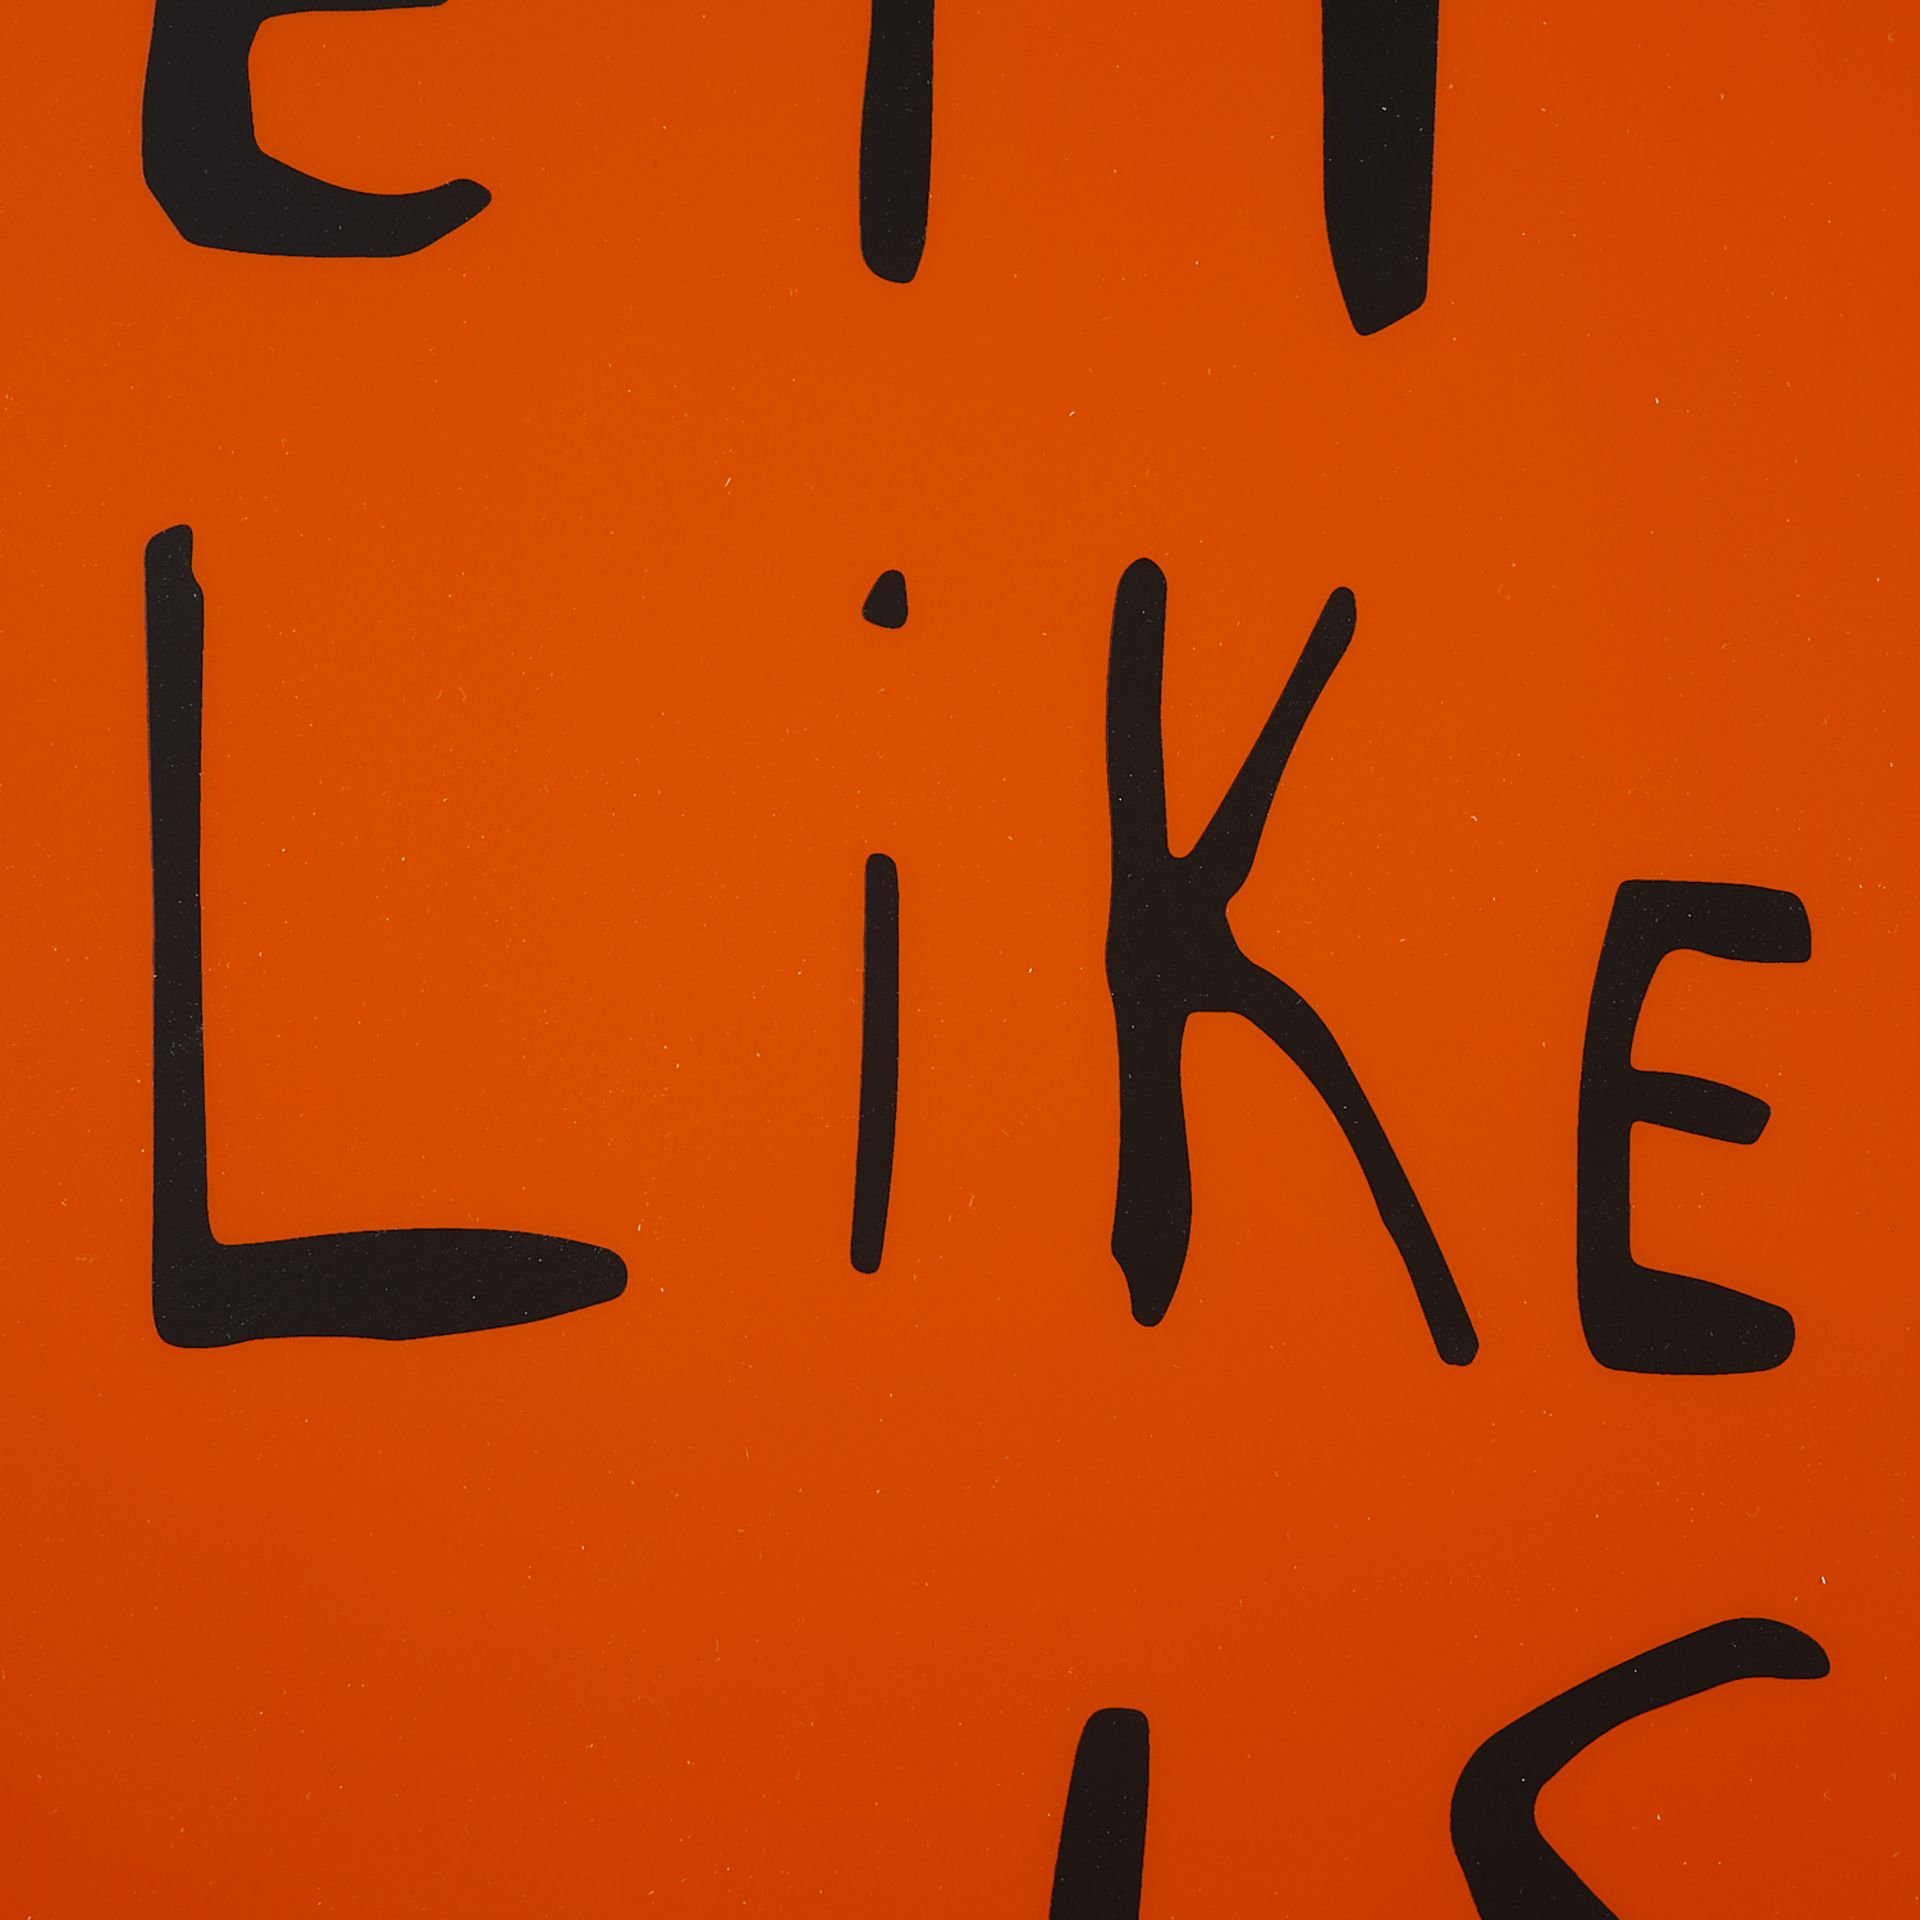 Sam Durant "Tell It Like It Is" Electric Sign 2020 - Image 6 of 11